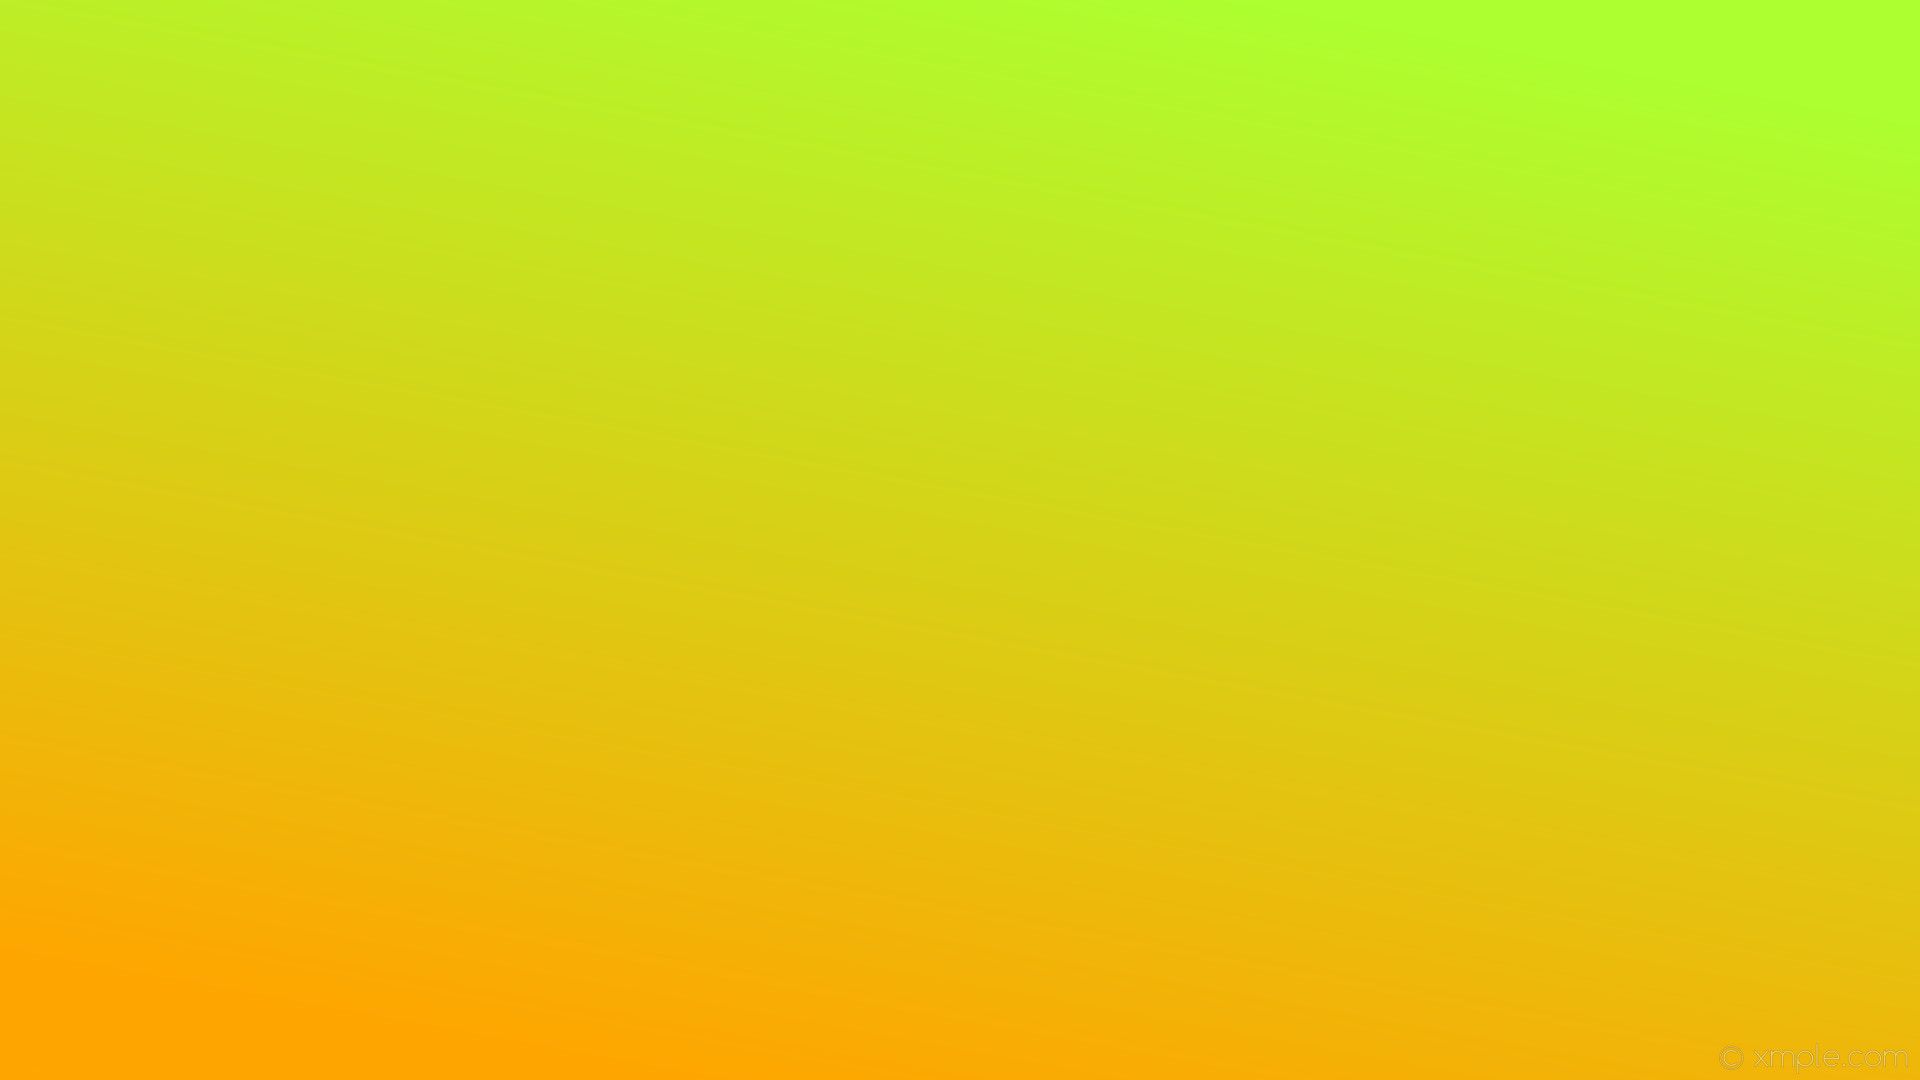 orange and green backgrounds